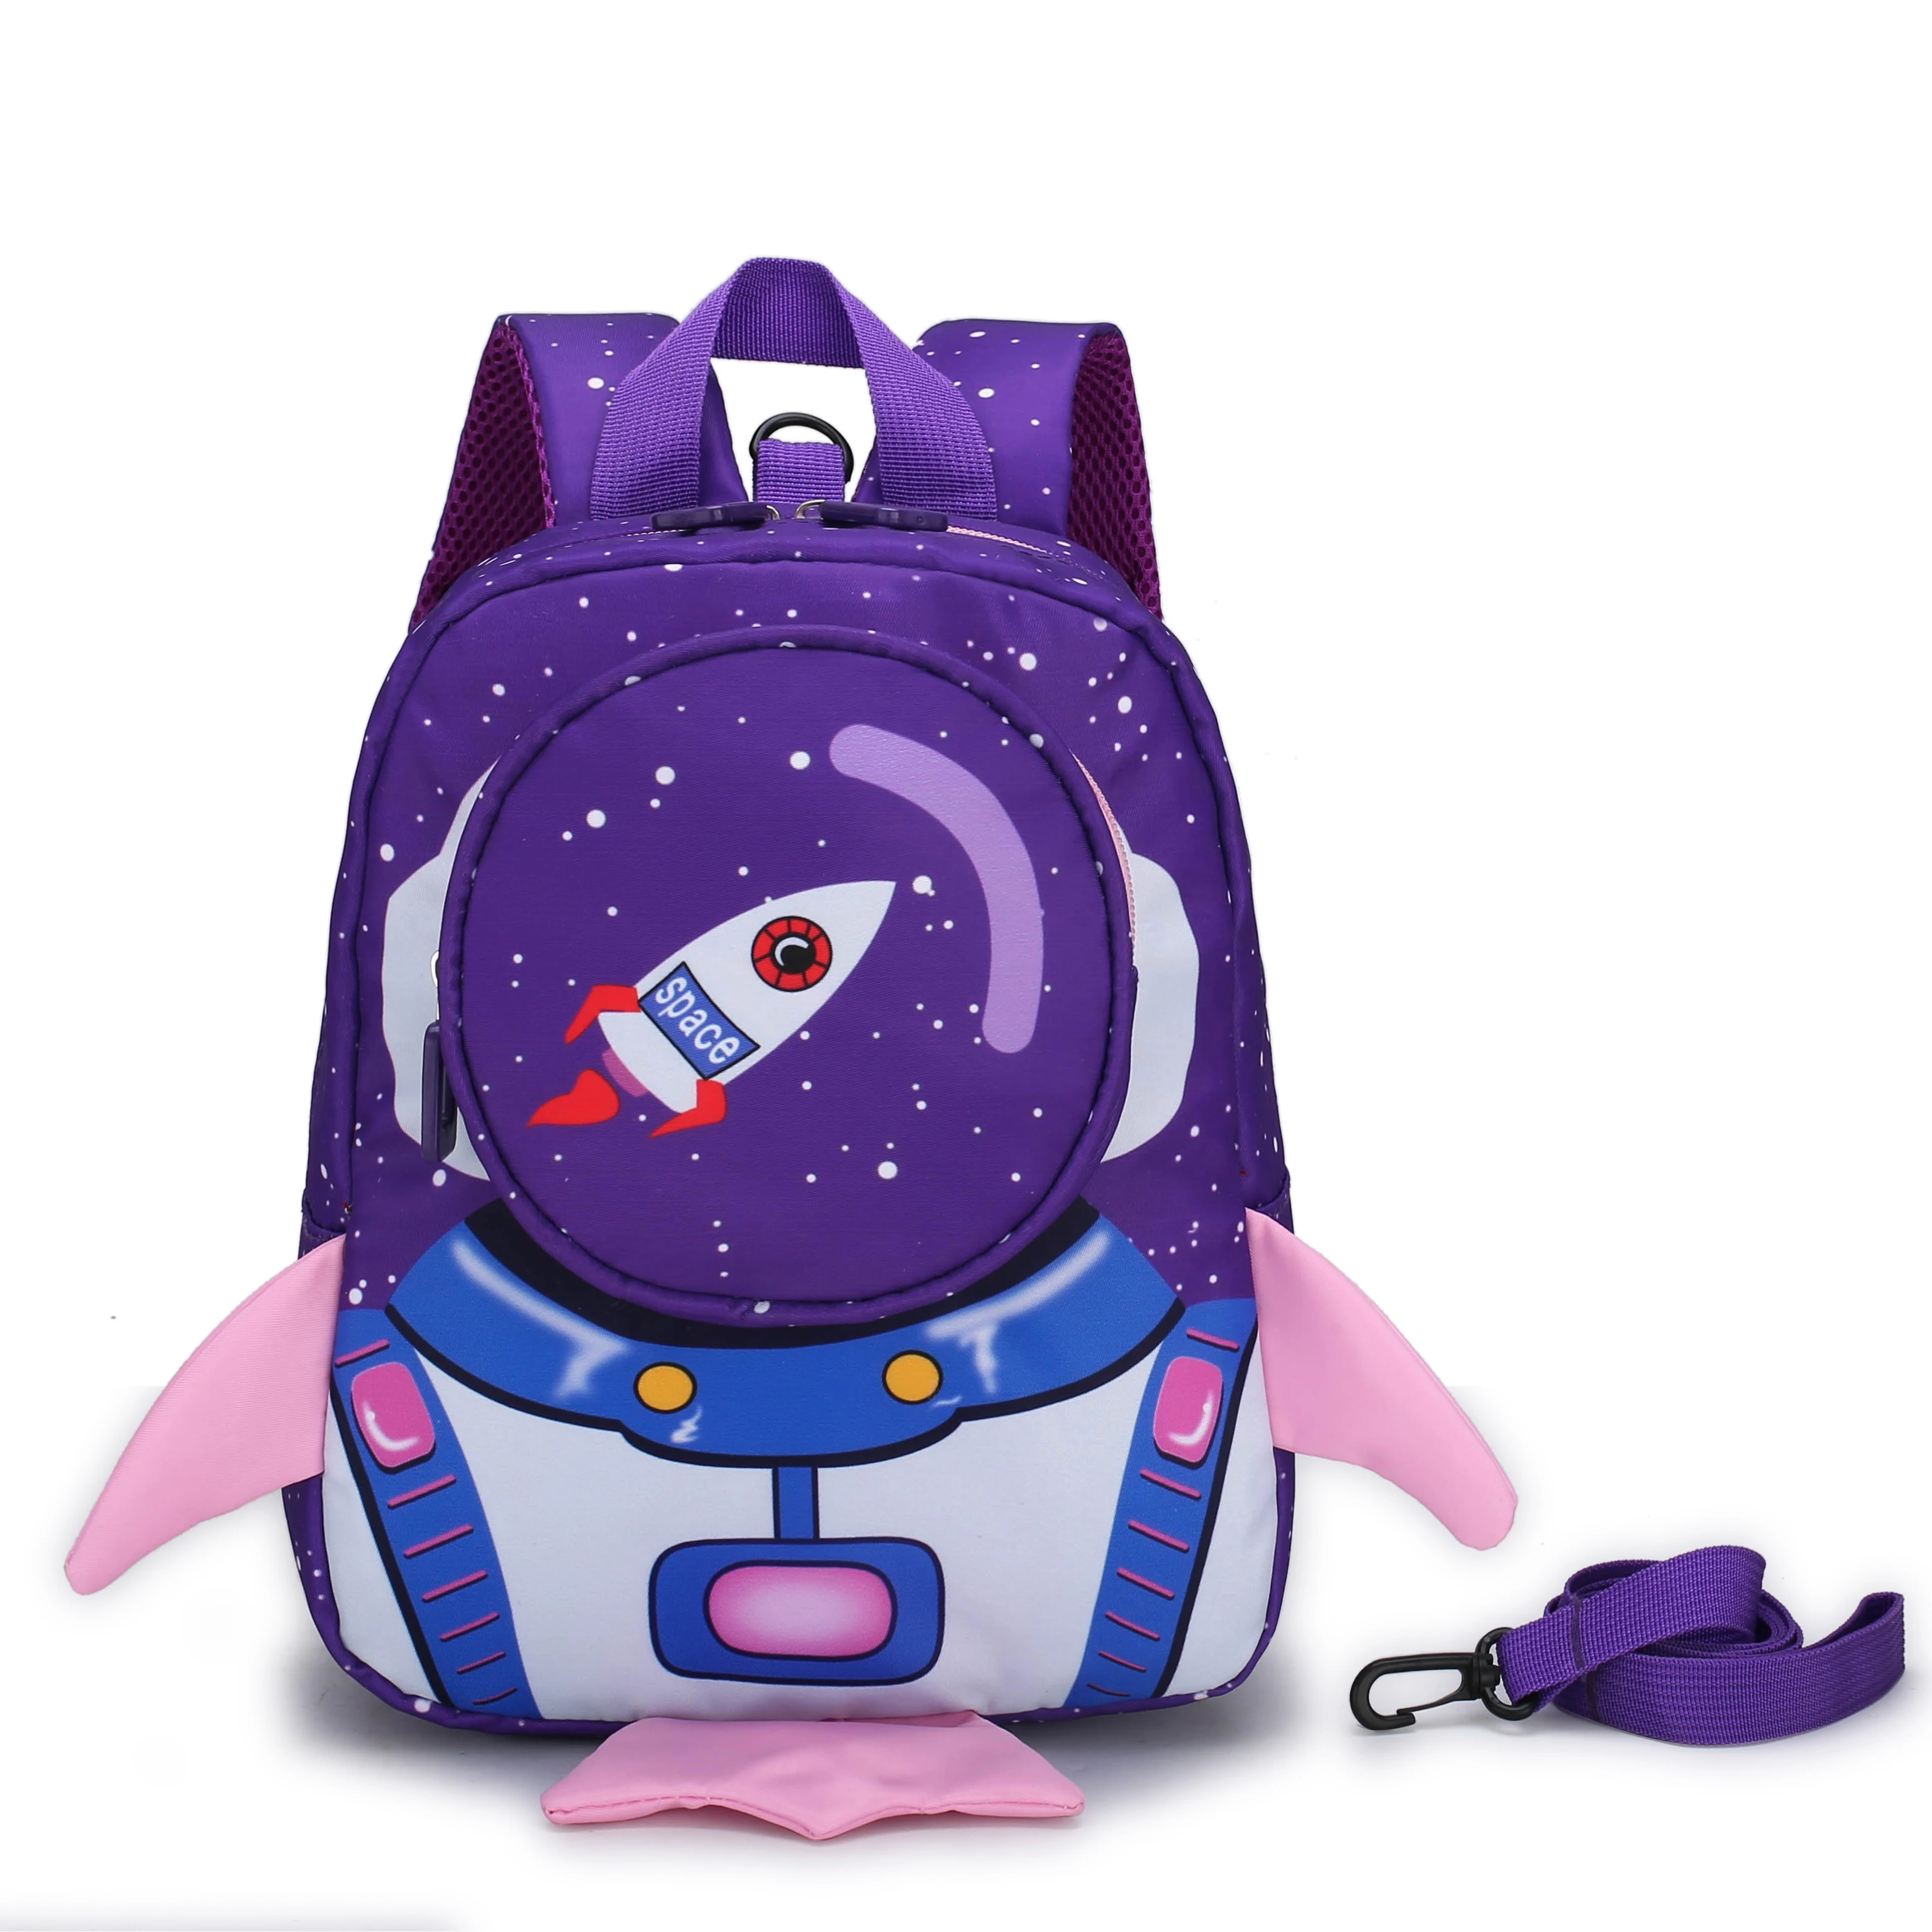 

Wholesale Low MOQ Bag Manufacturers Kids School Bag Fancy Primary Bagpack School Bags For Teenagers, Blue,purple,black,pink, red, or customized